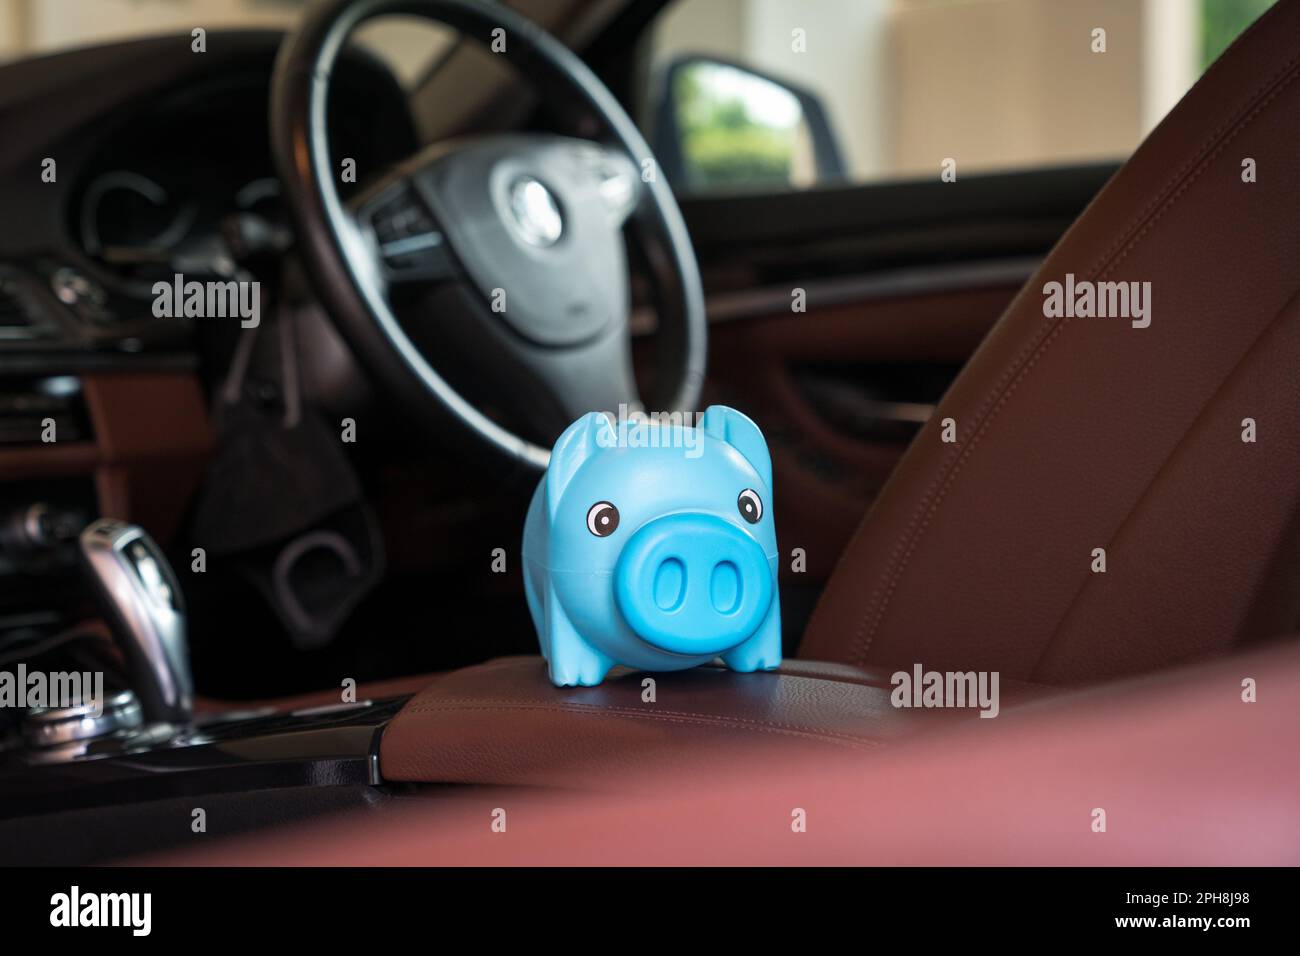 Blue piggy bank money box Inside a car vehicle. Car purchase and insurance concept. Stock Photo